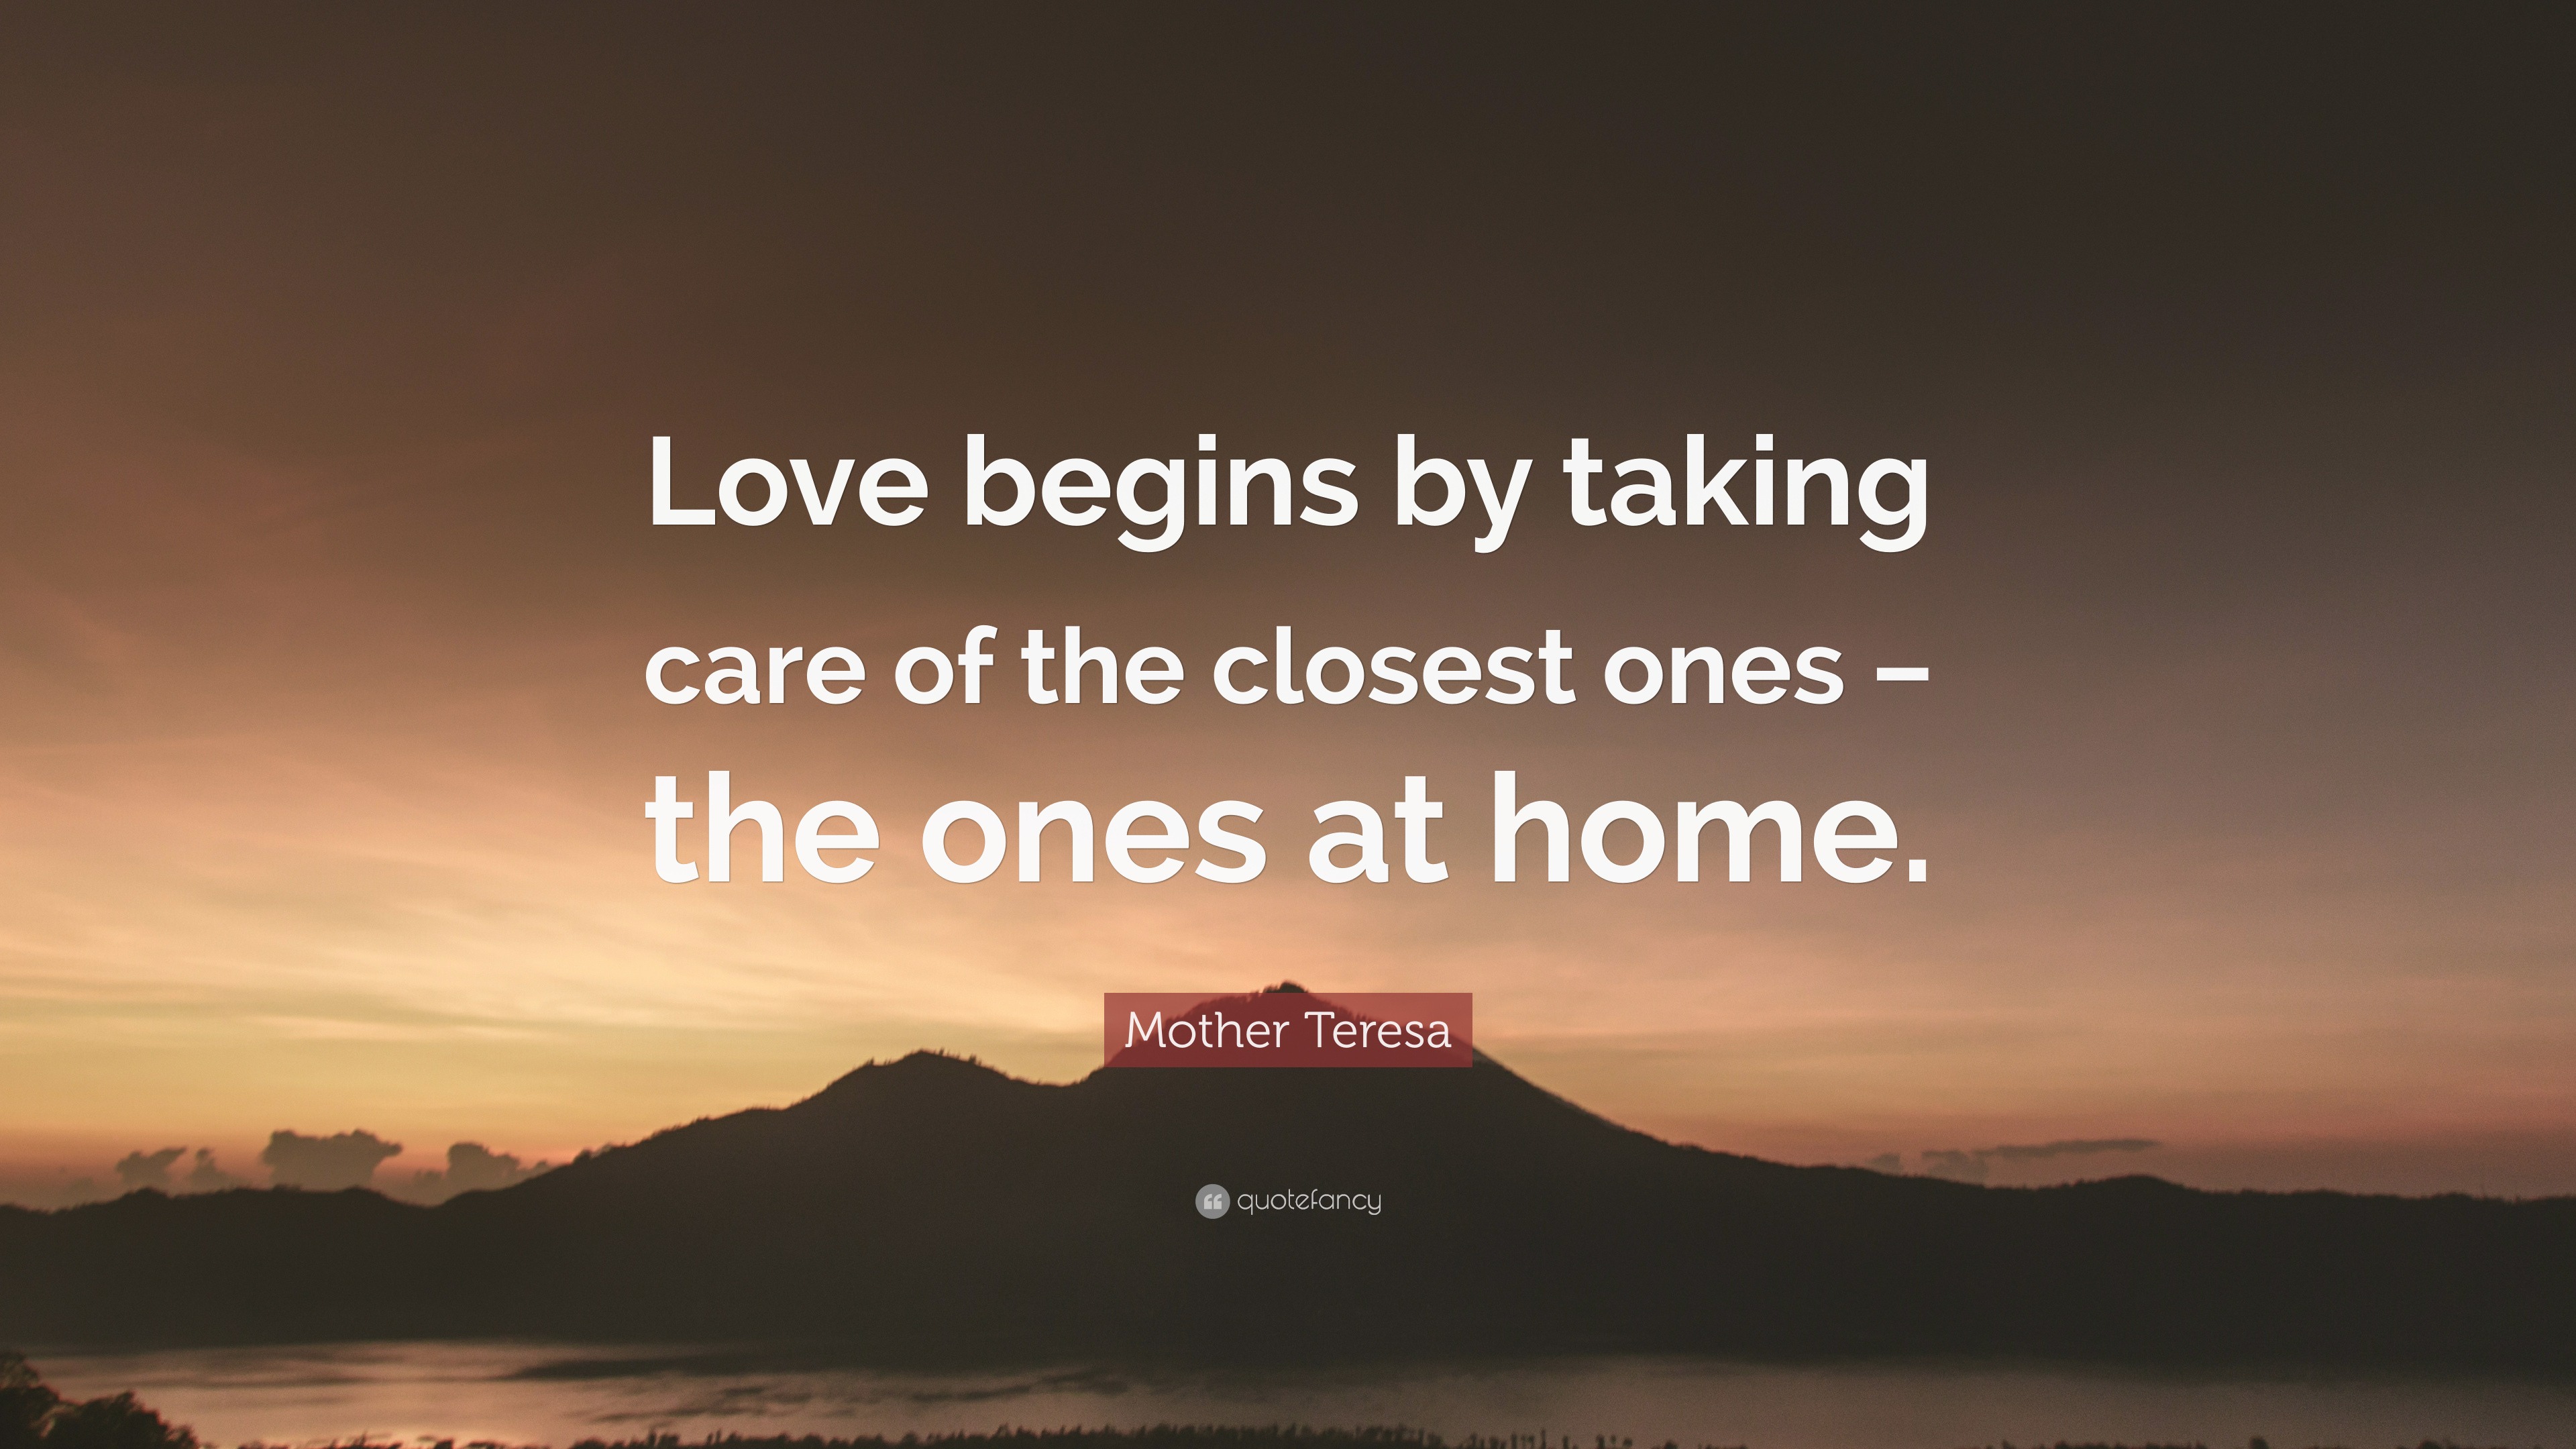 Mother Teresa Quote “Love begins by taking care of the closest ones – the